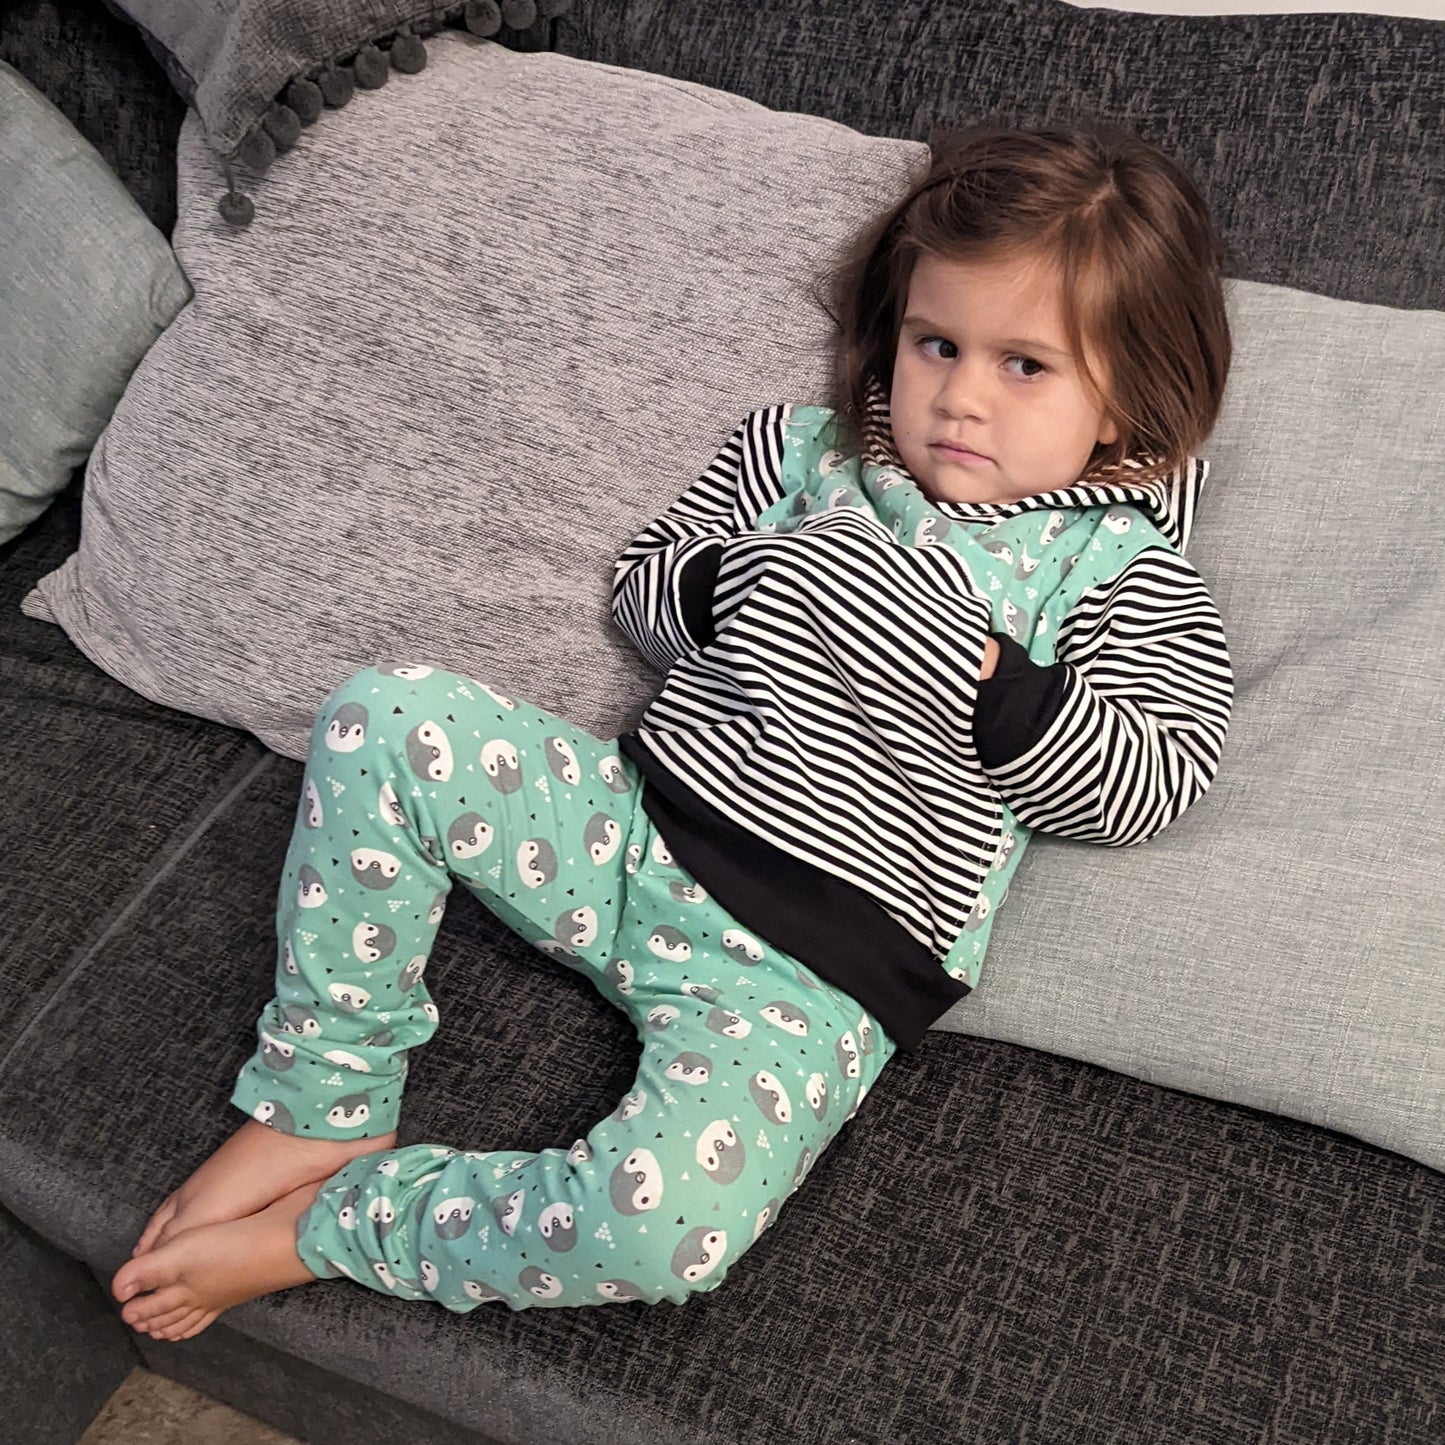 Sophie modelling her mint penguin hoodie with some matching organic harem joggers.